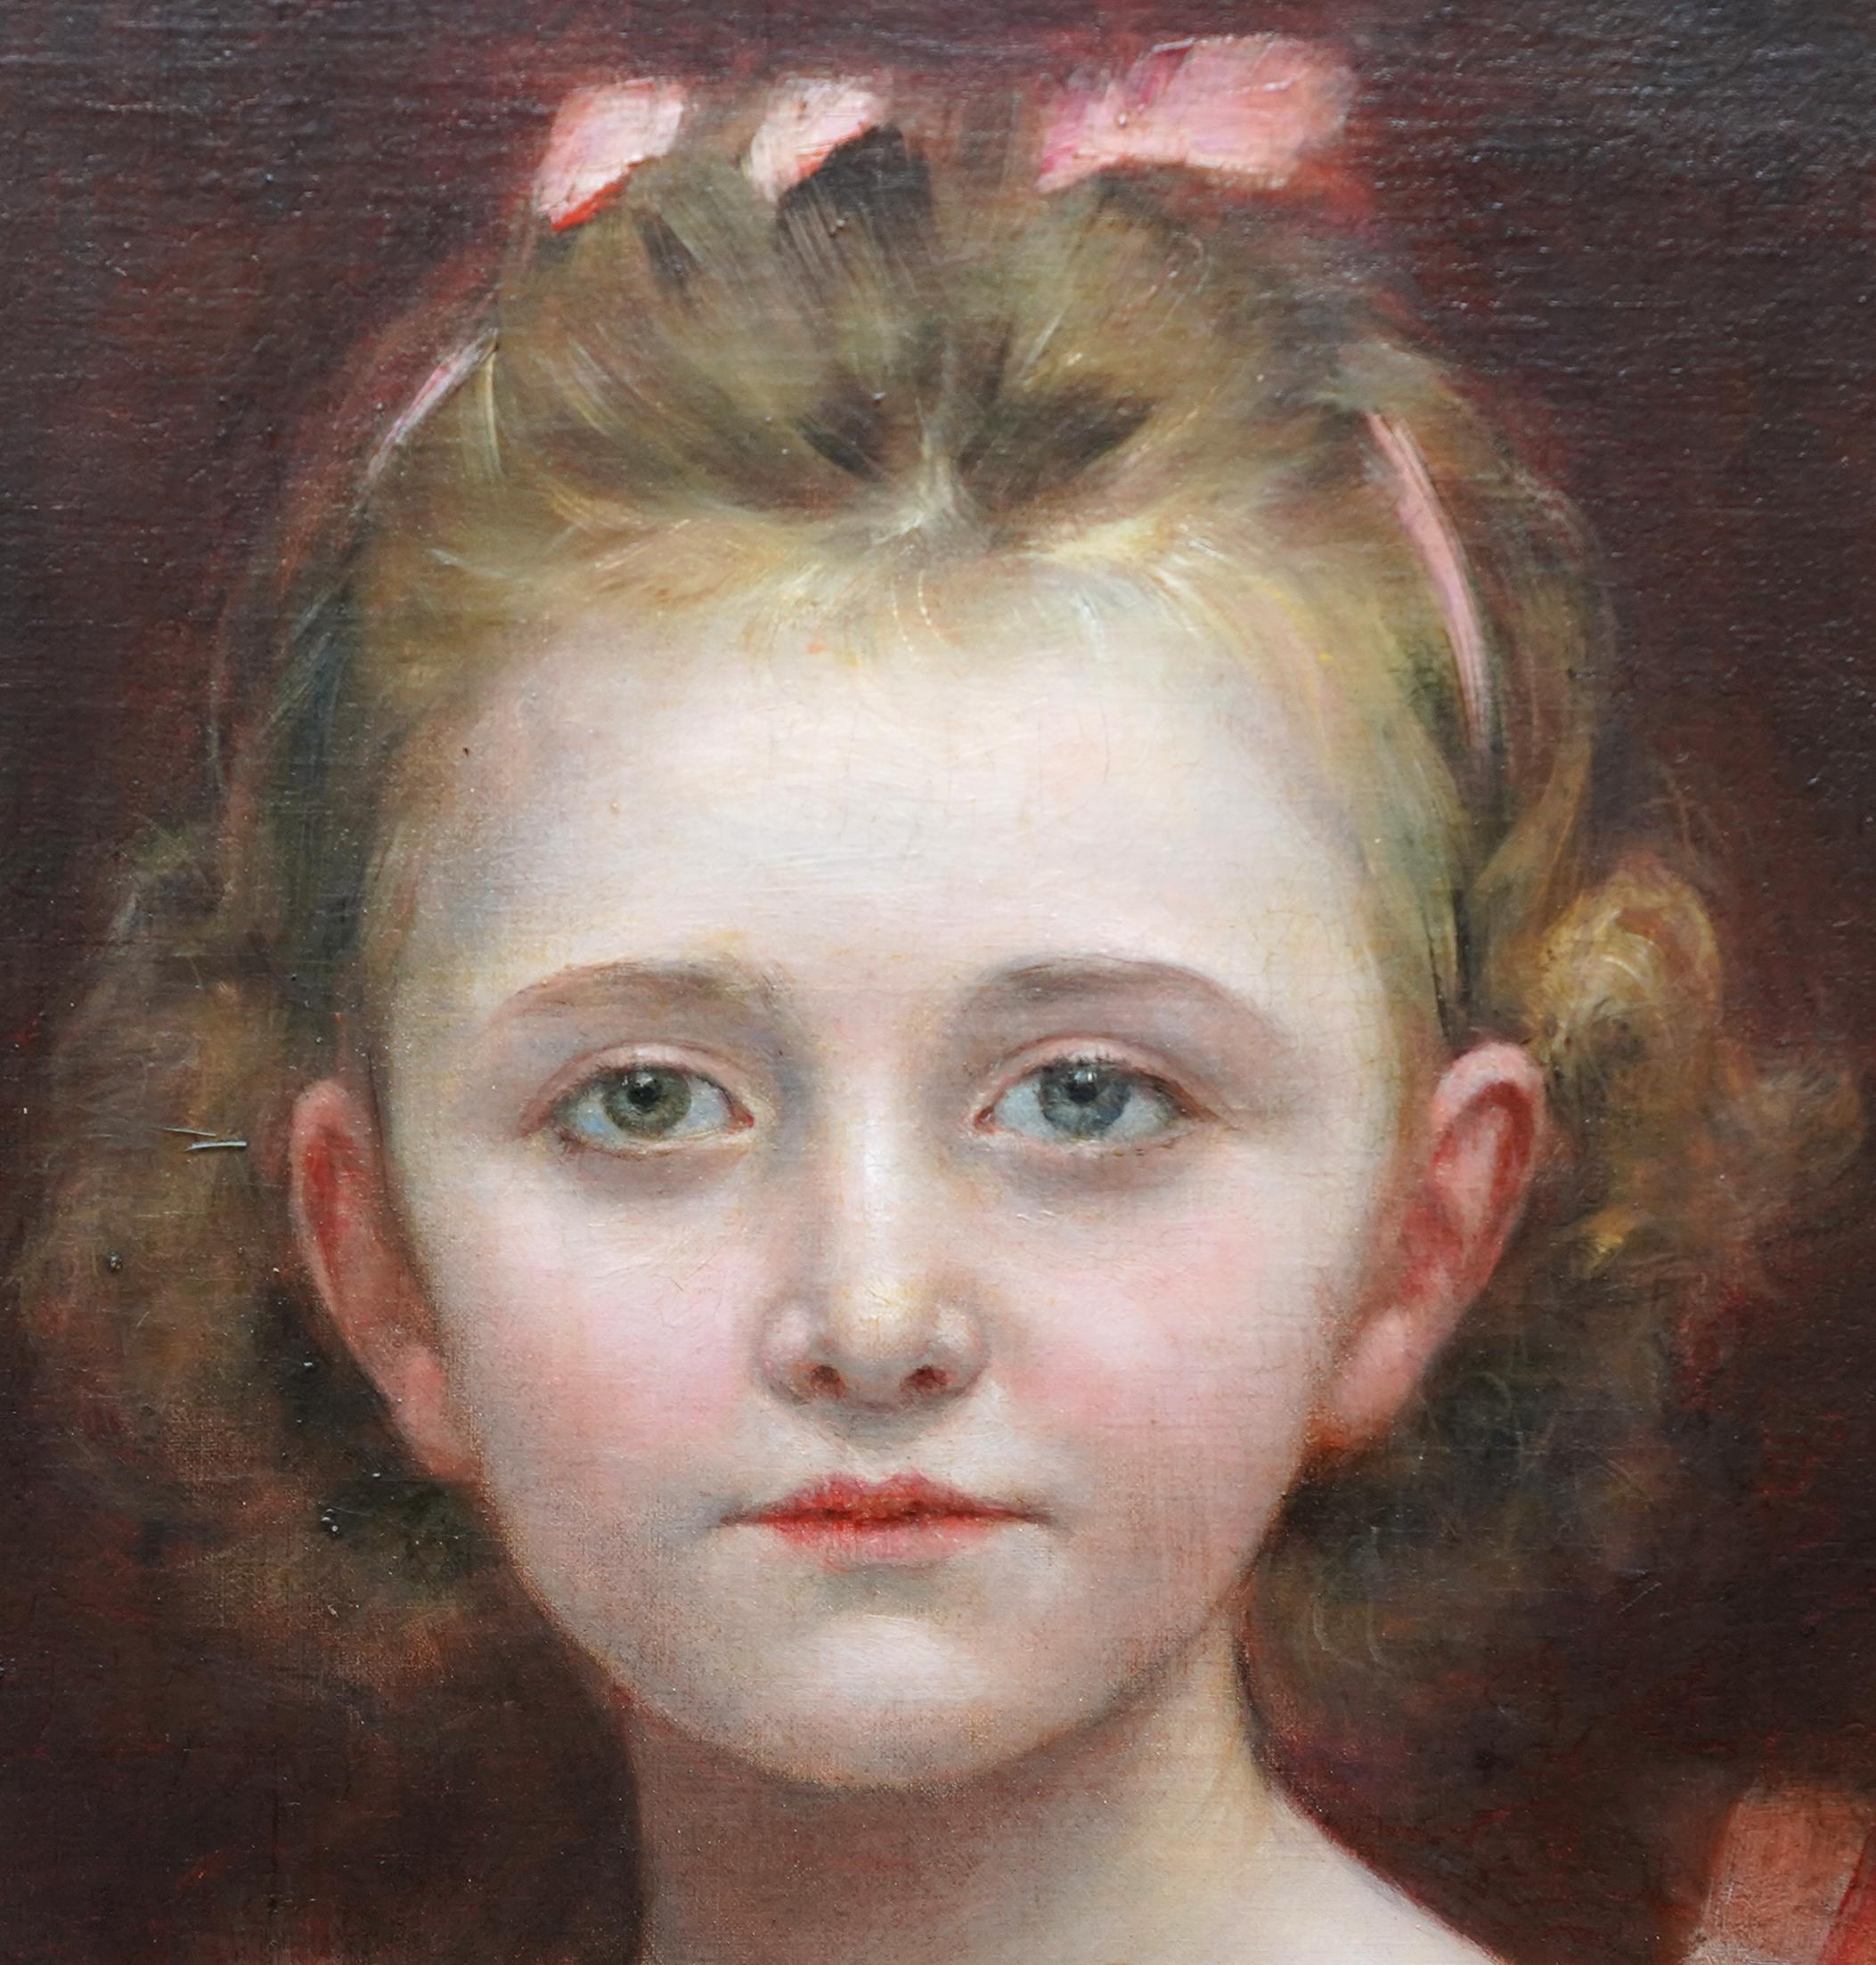 This captivating portrait oil painting is by noted artist Georges Van Den Bos. Painted circa 1905, it is a half length portrait of a young girl wearing a peach dress with lace bodice and matching ribbons in her hair. There is incredible realism in